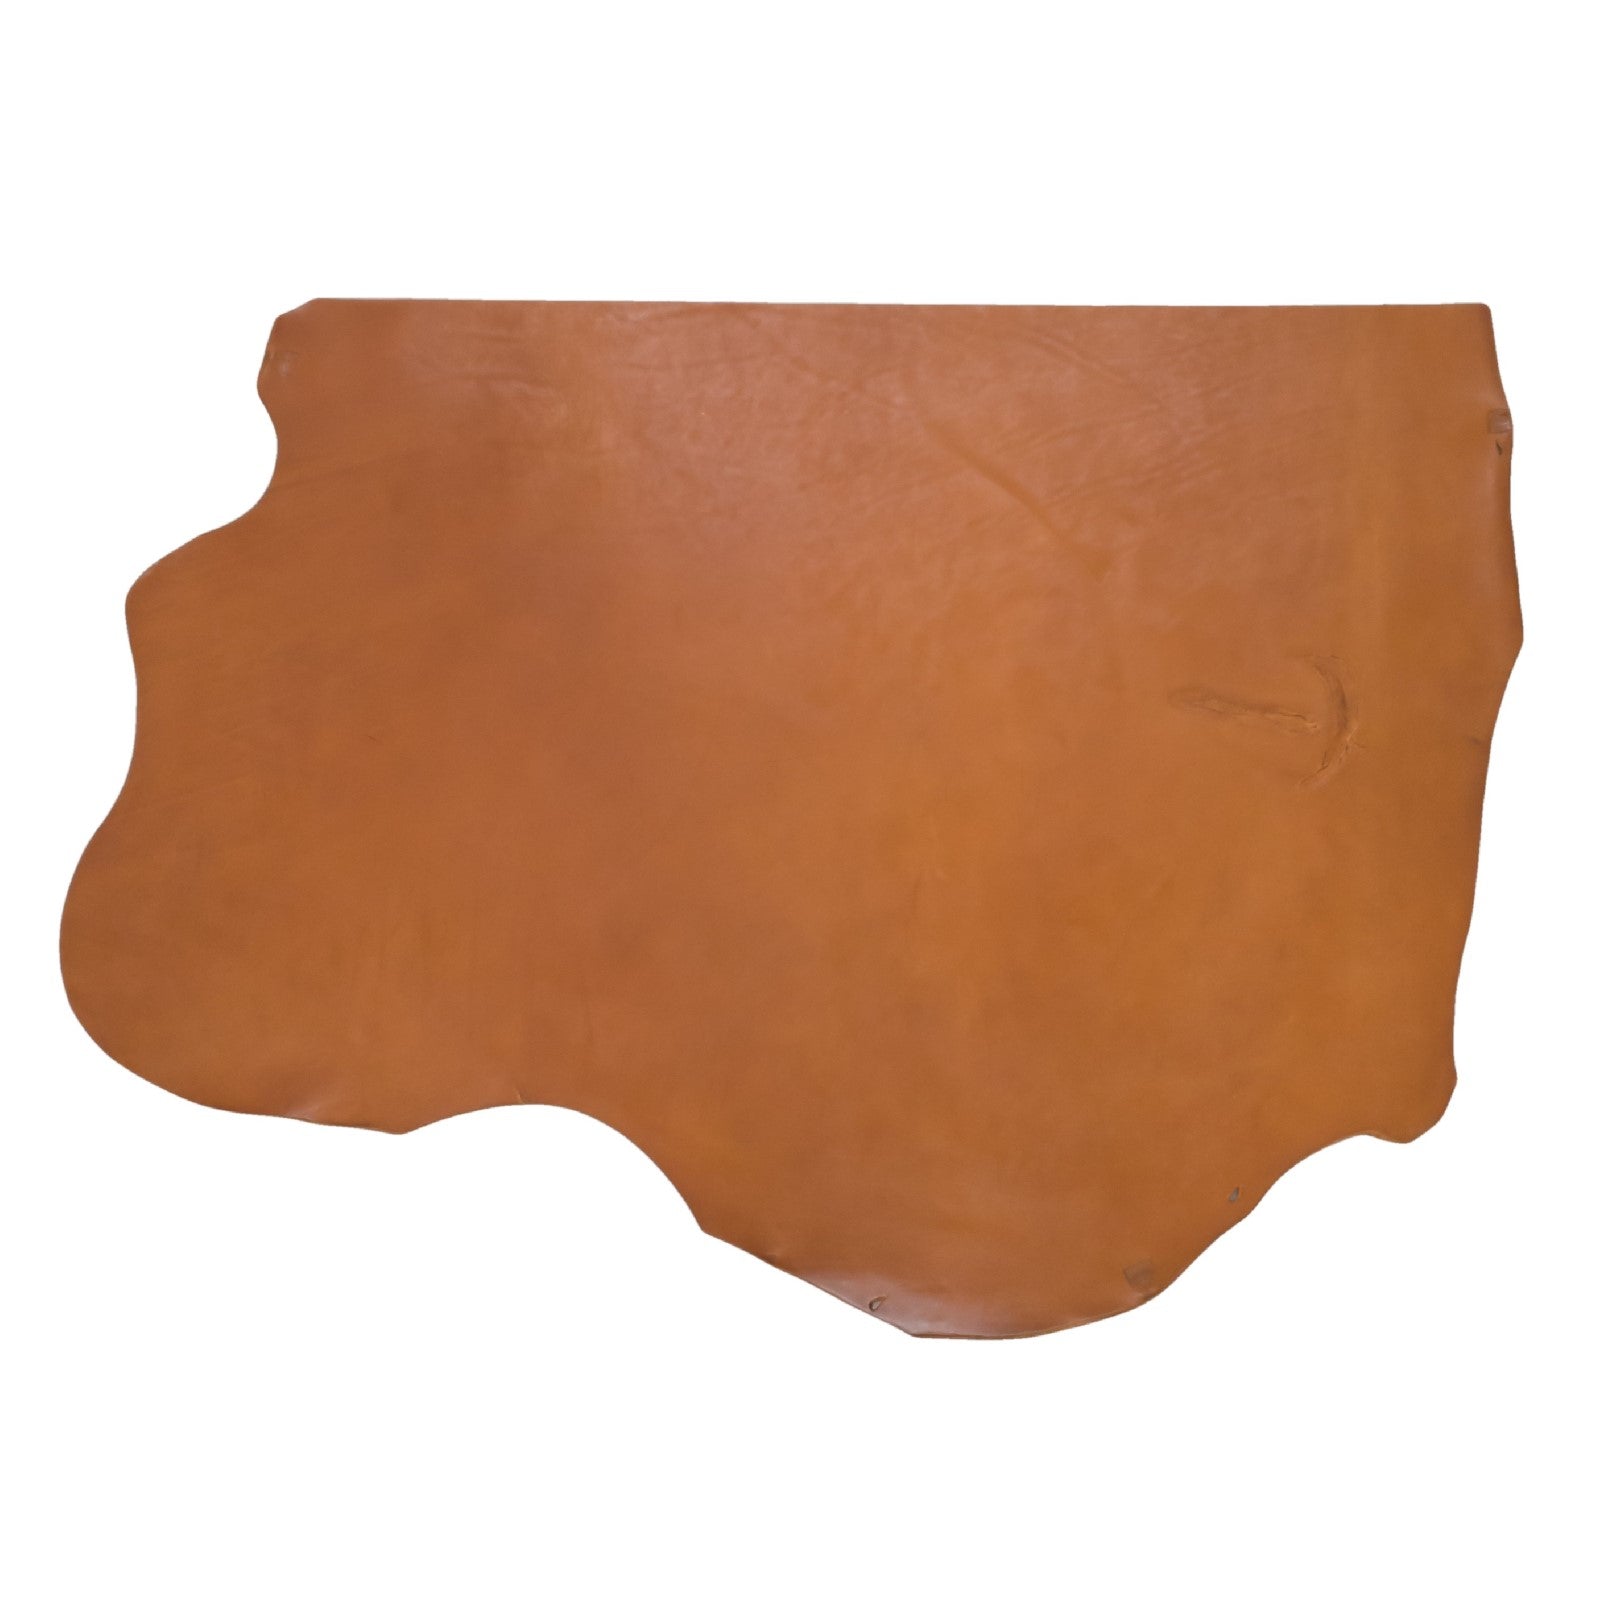 Tawny Brown, 8-9 oz, 6.5-7.5/18-23 Sq Ft Sole Veg Tan Sides & Pieces, 6.5-7.5 / Project Piece (Bottom) | The Leather Guy